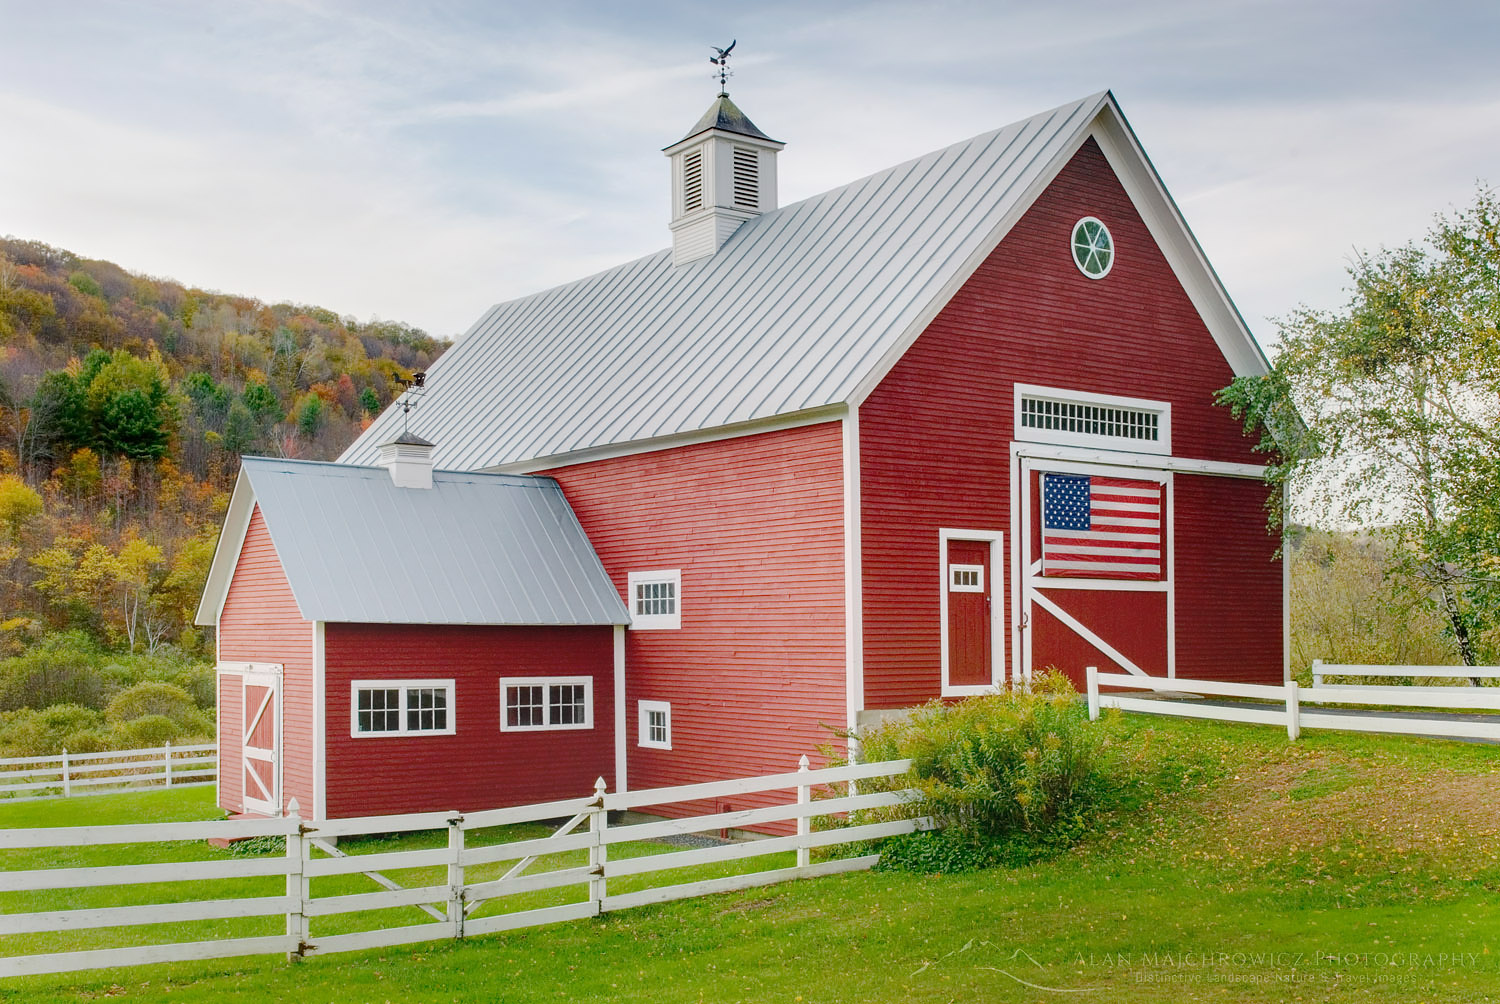 Classic New England farm with red barn and white fence, Vermont #7595